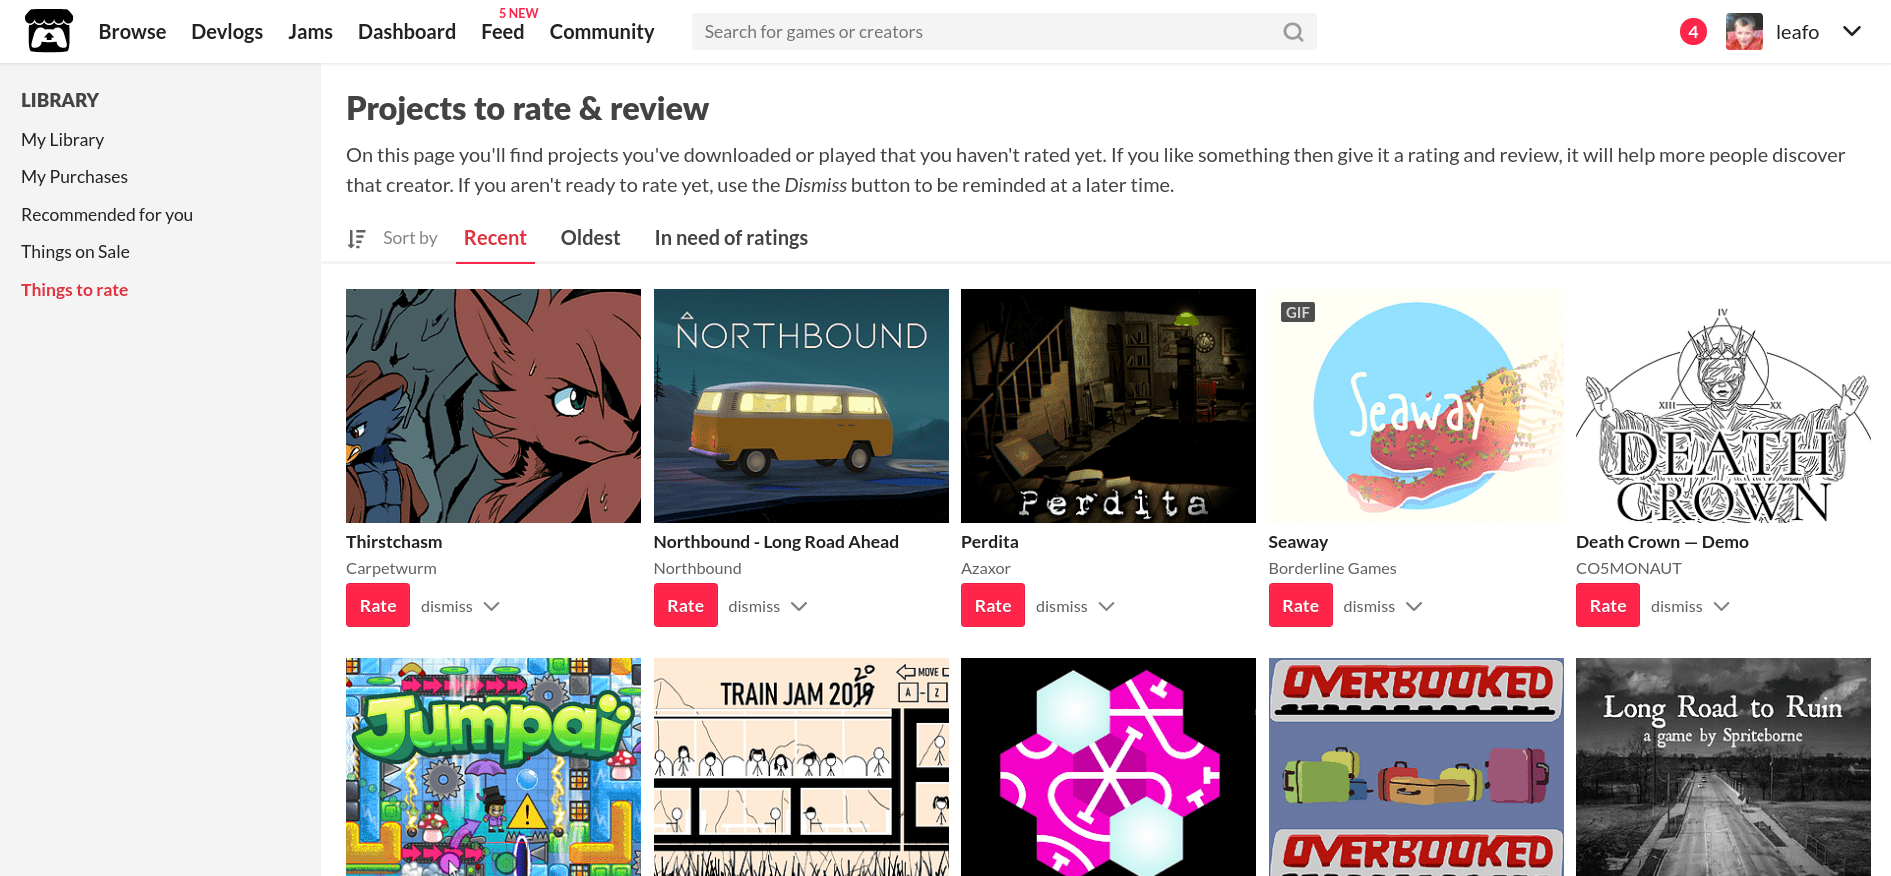 itch.io Review